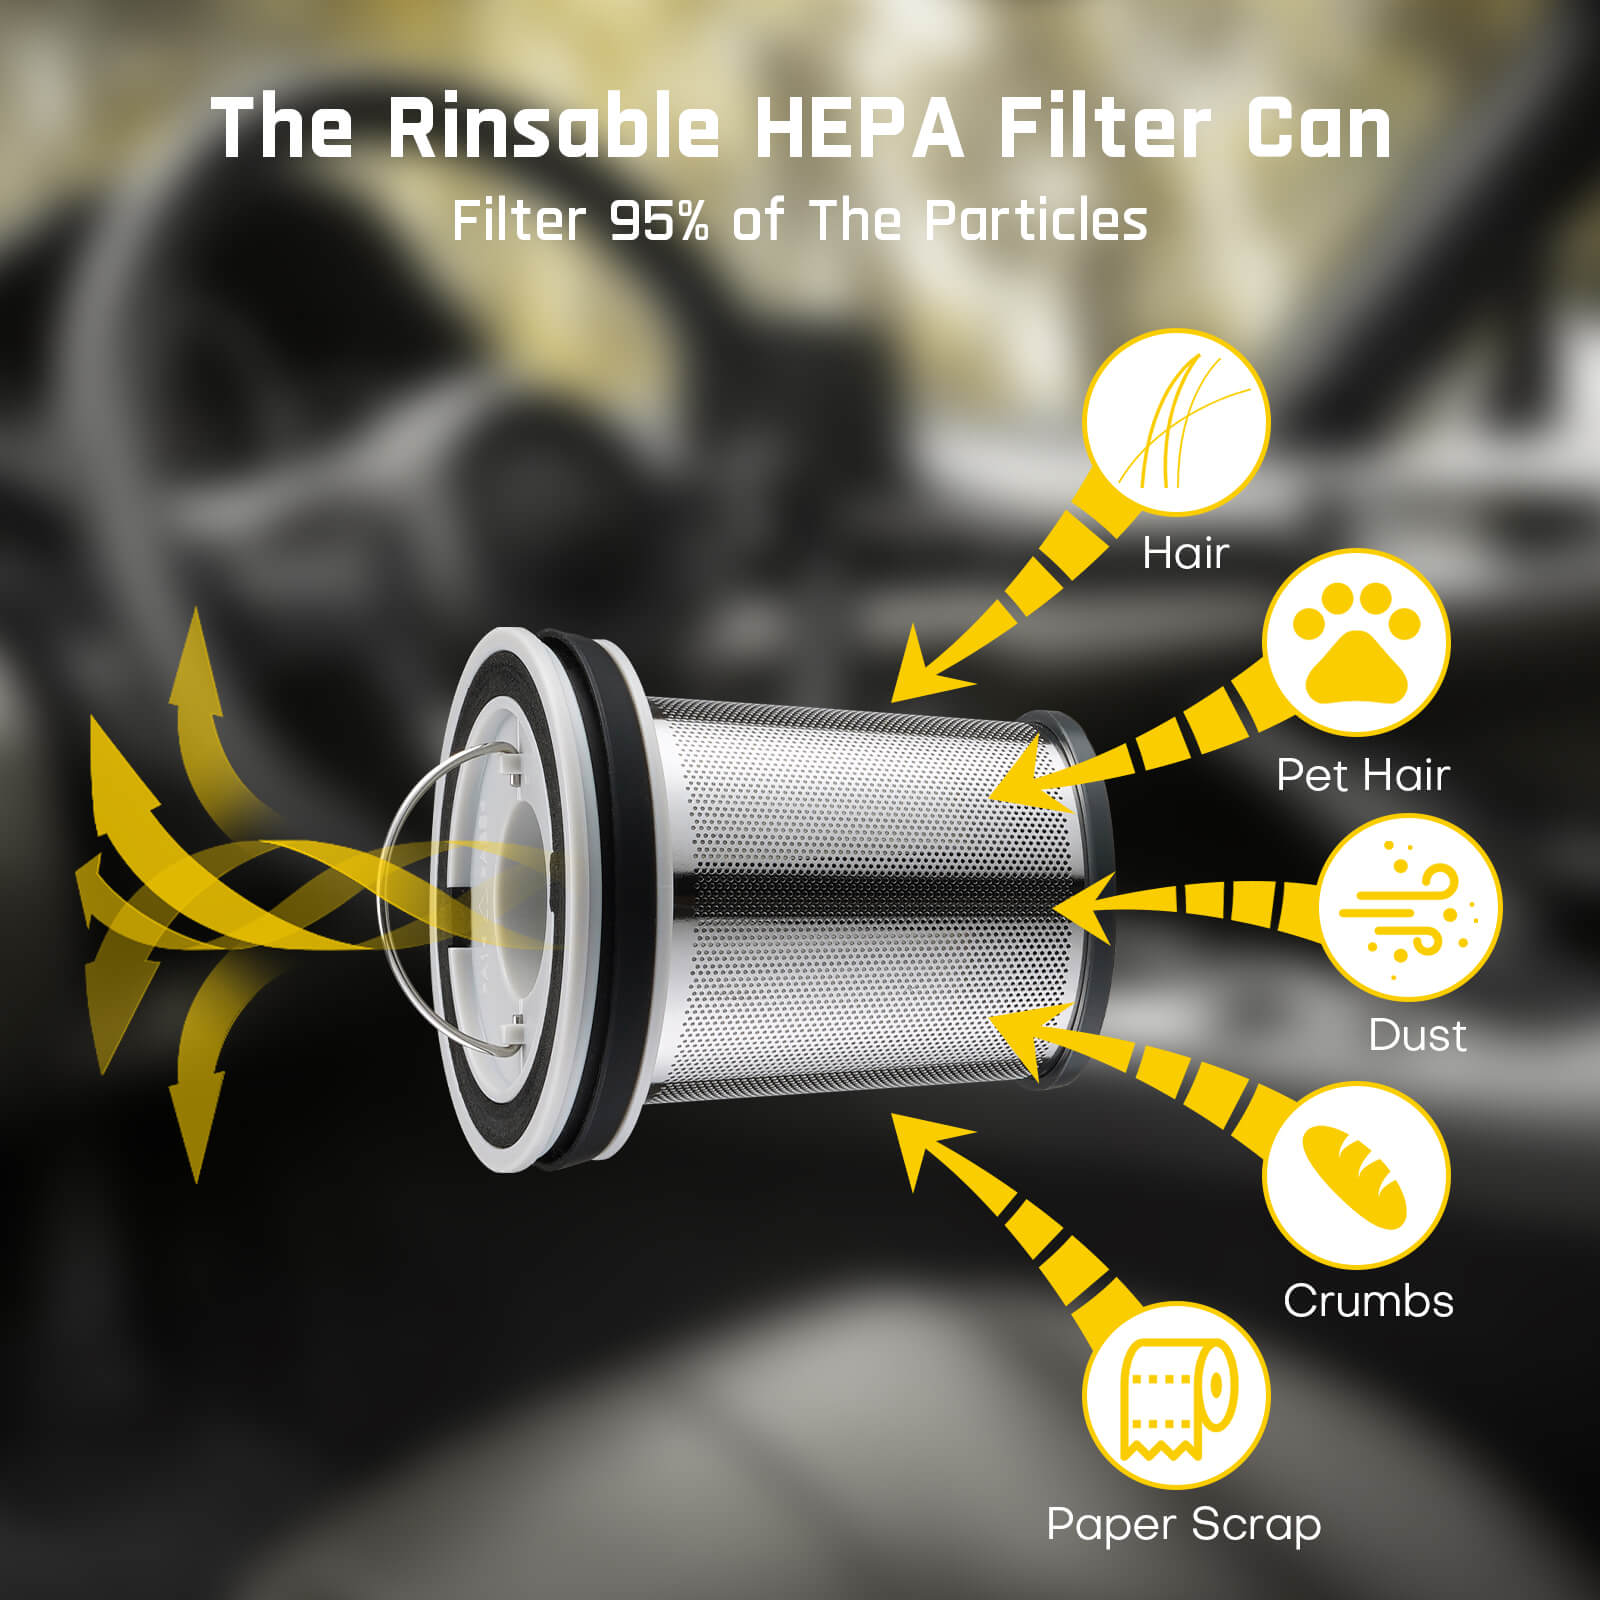 The HEPA 11 filter filters out 95% of particles such as fine dust, sawdust, wood chips, fine powder, and work site debris